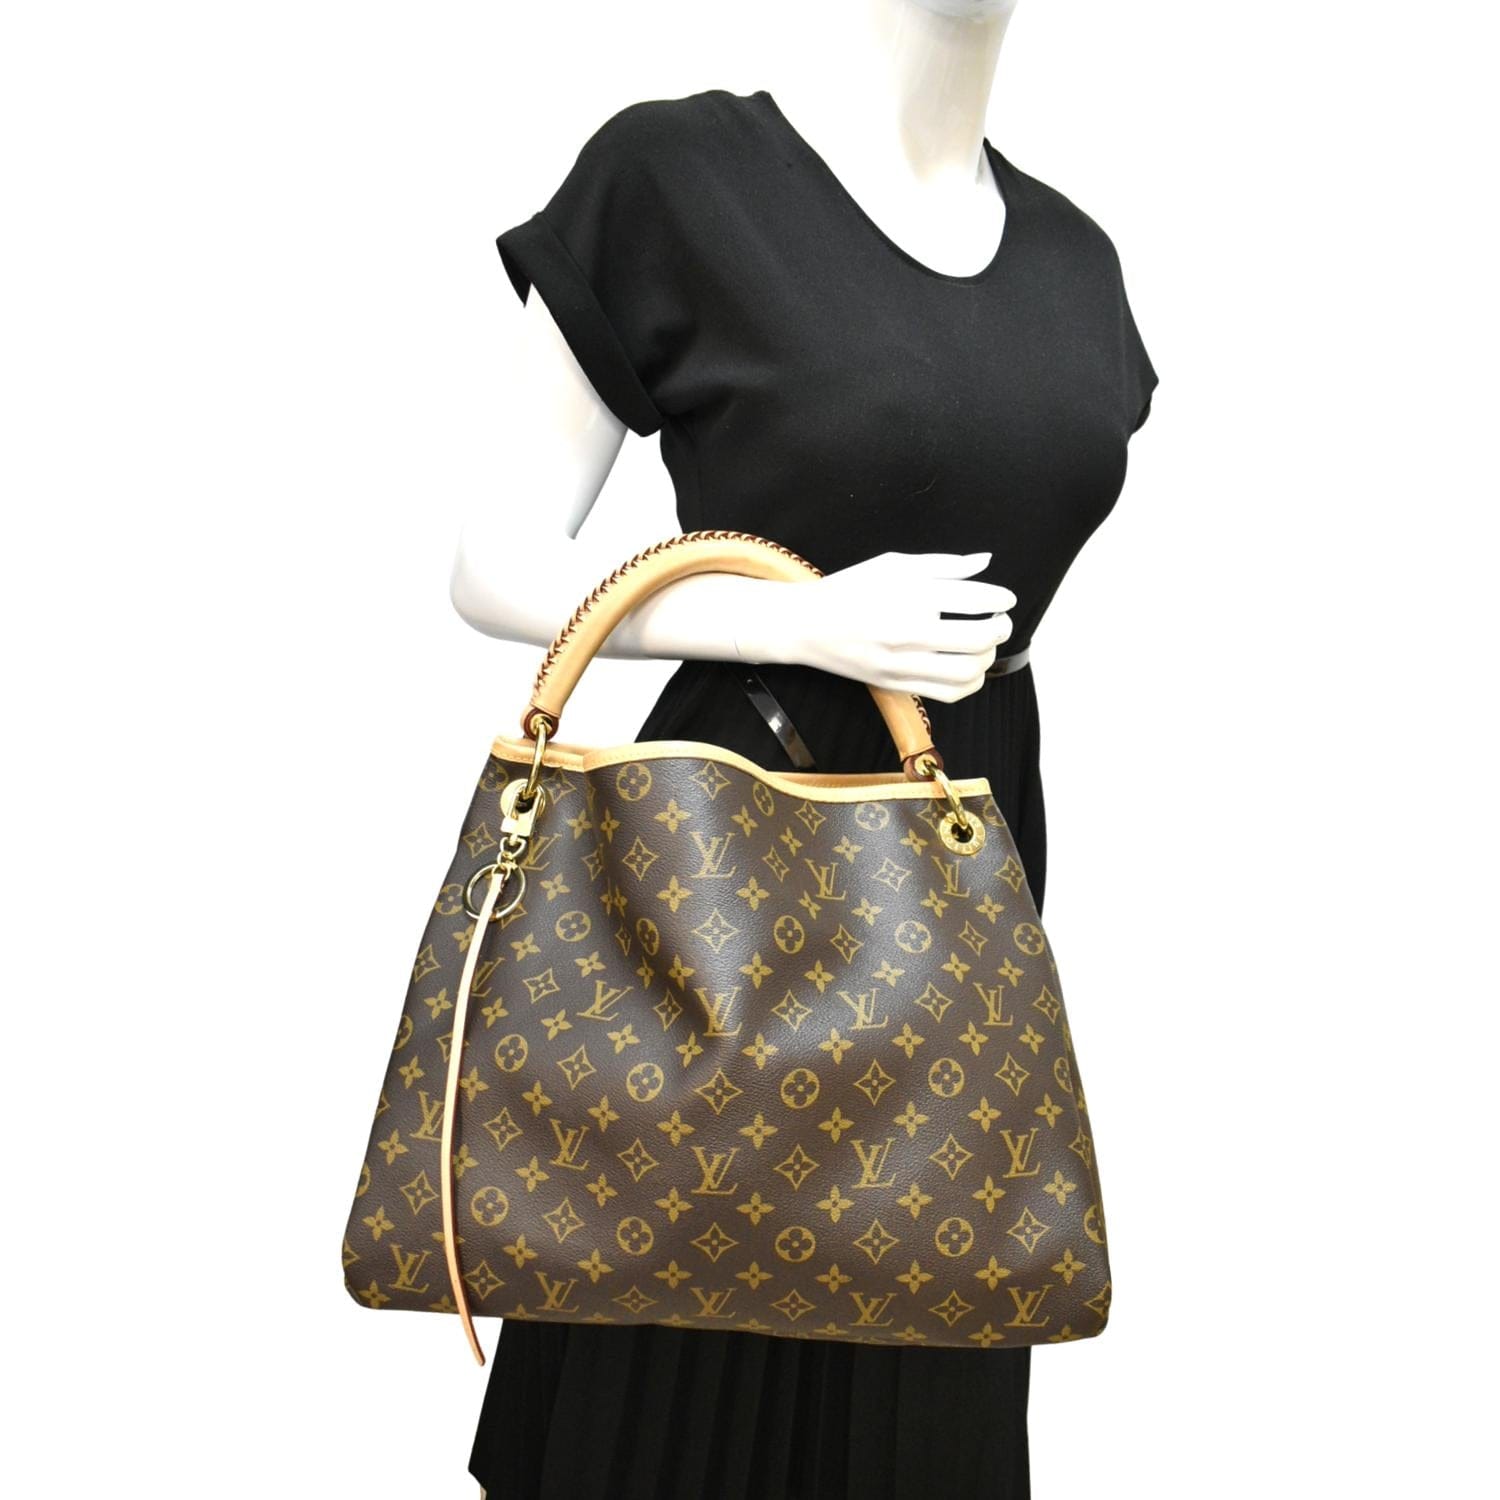 AUTHENTIC LOUIS VUITTON ARTSY MM leather brown hobo shoulder bag 2 way